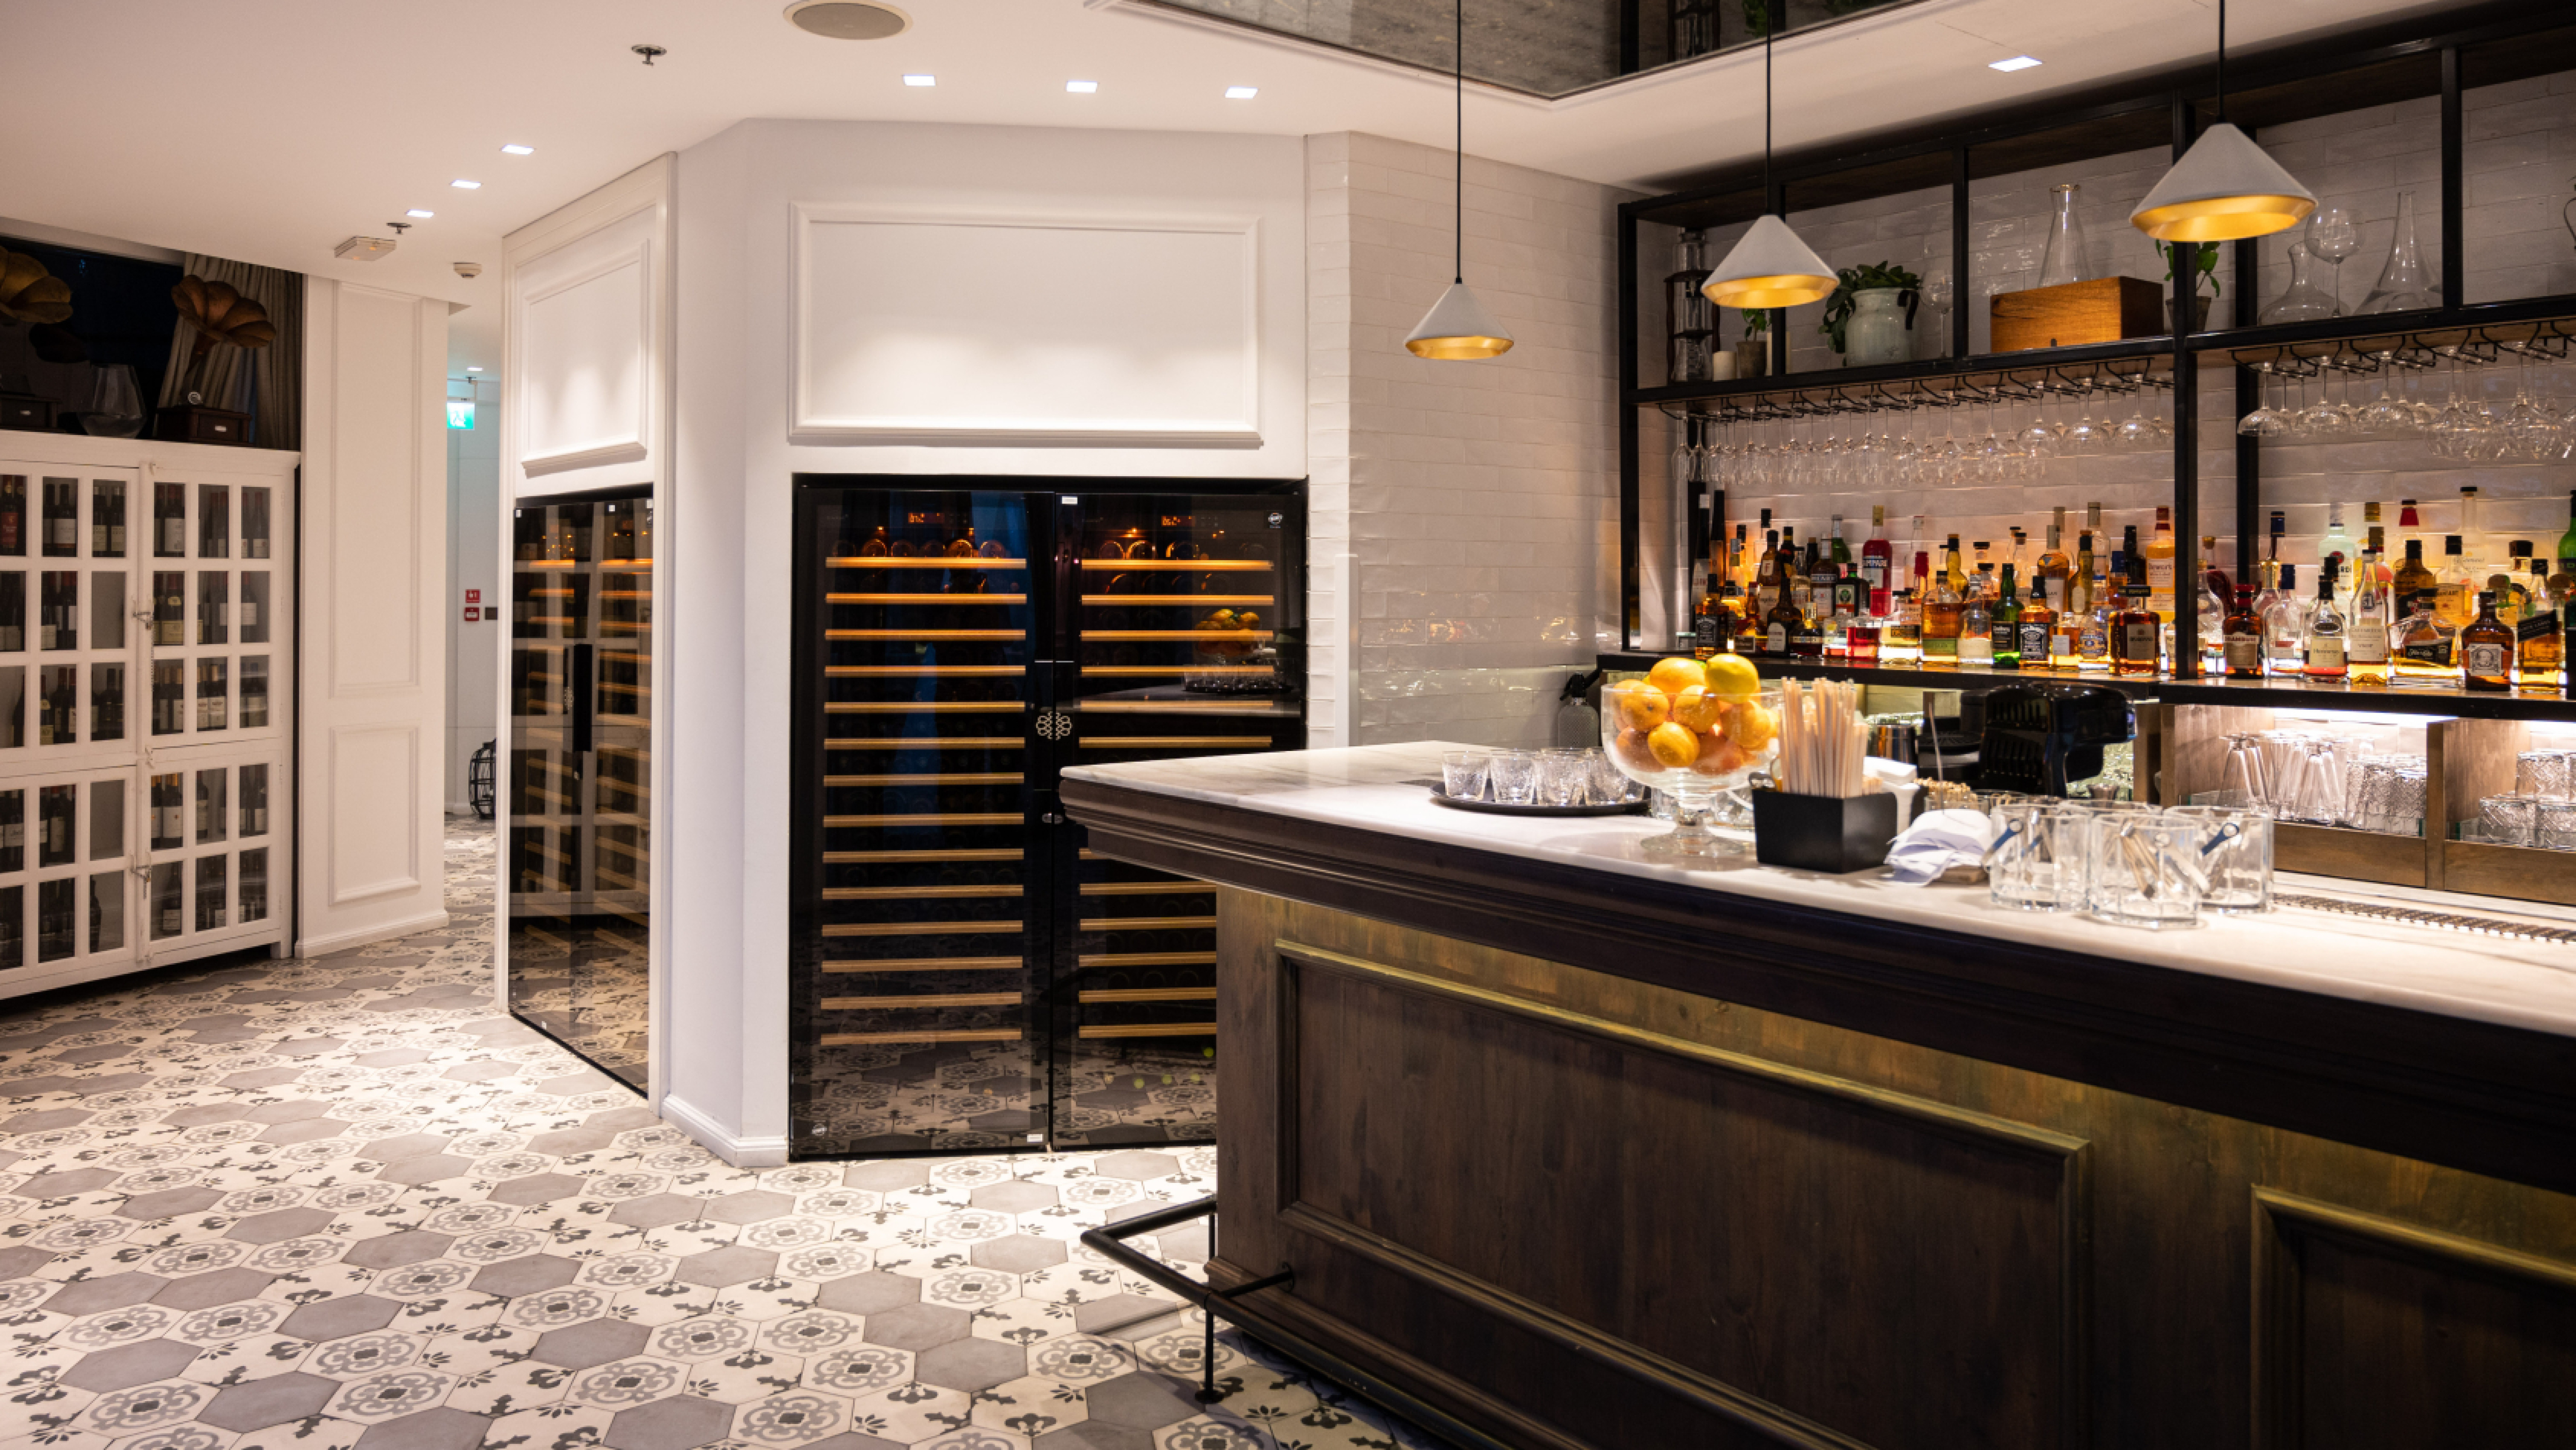 Air-conditioned wine spaces, glass cabinets, refrigerated display cases, professional wine cellars and coolers, discover our most beautiful installations in establishments with exceptional decoration.